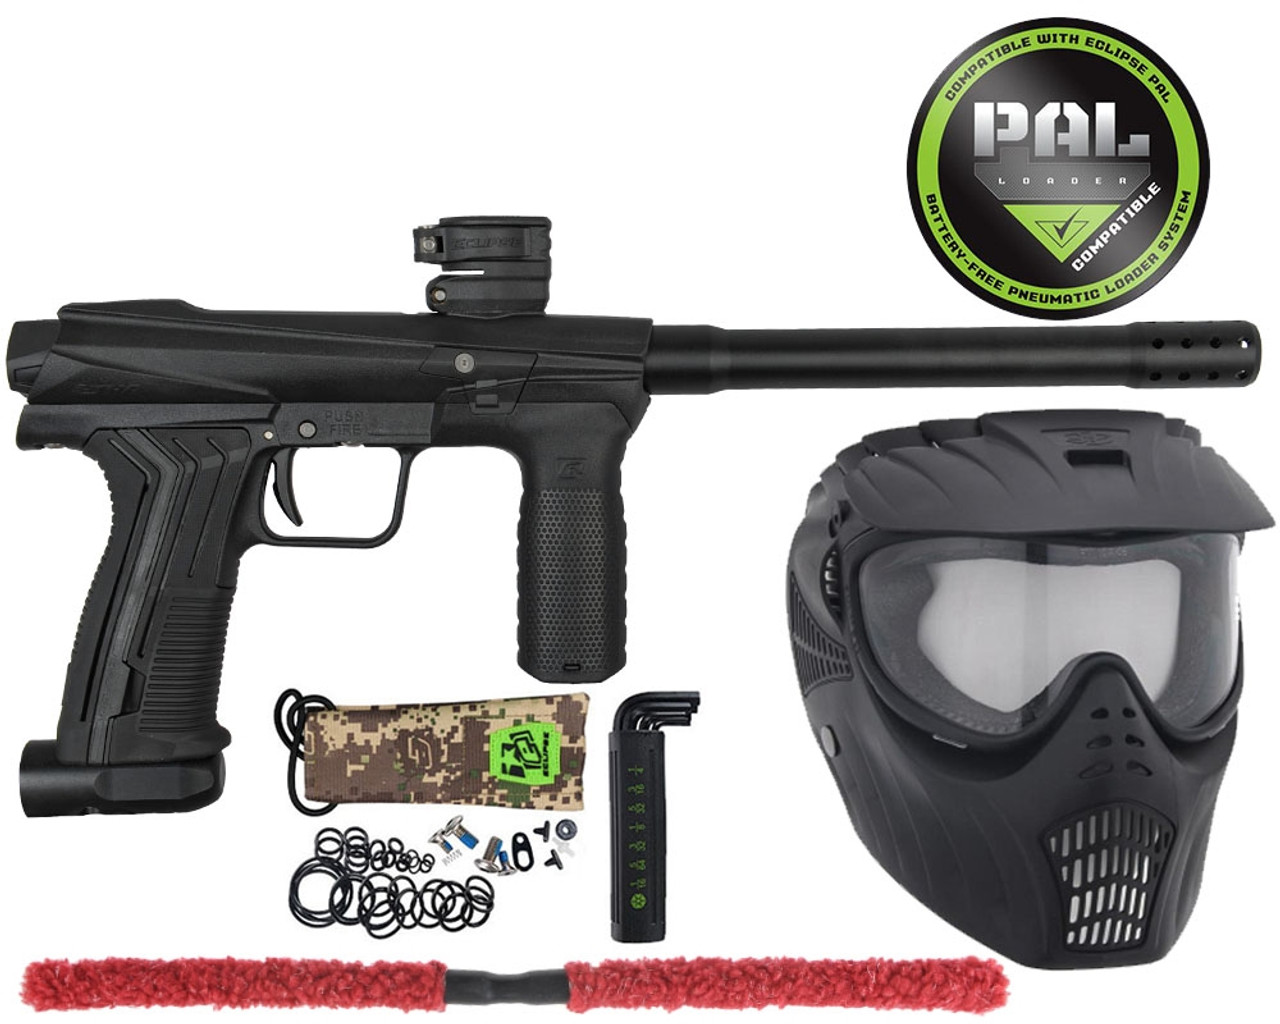 Planet Eclipse Ego LV1.6 Efficiency Test, Lone Wolf Paintball Michigan